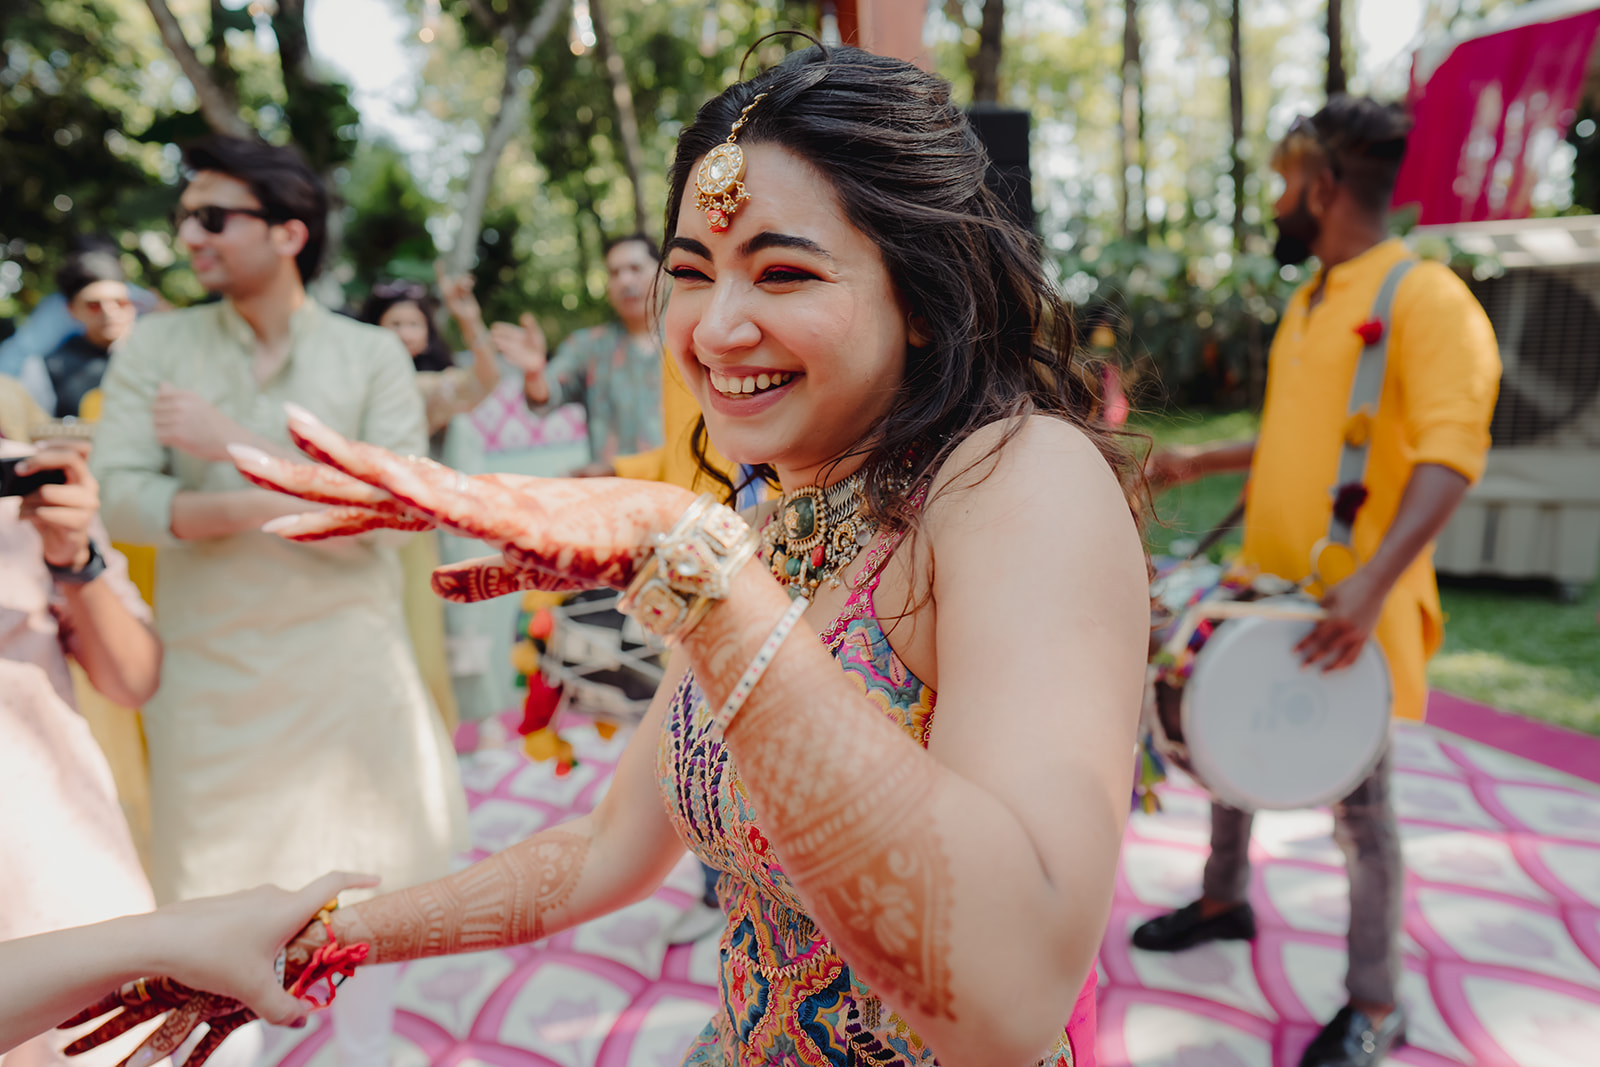 Bridal rhythm: Bride joyfully dancing to the lively and traditional dhol music.